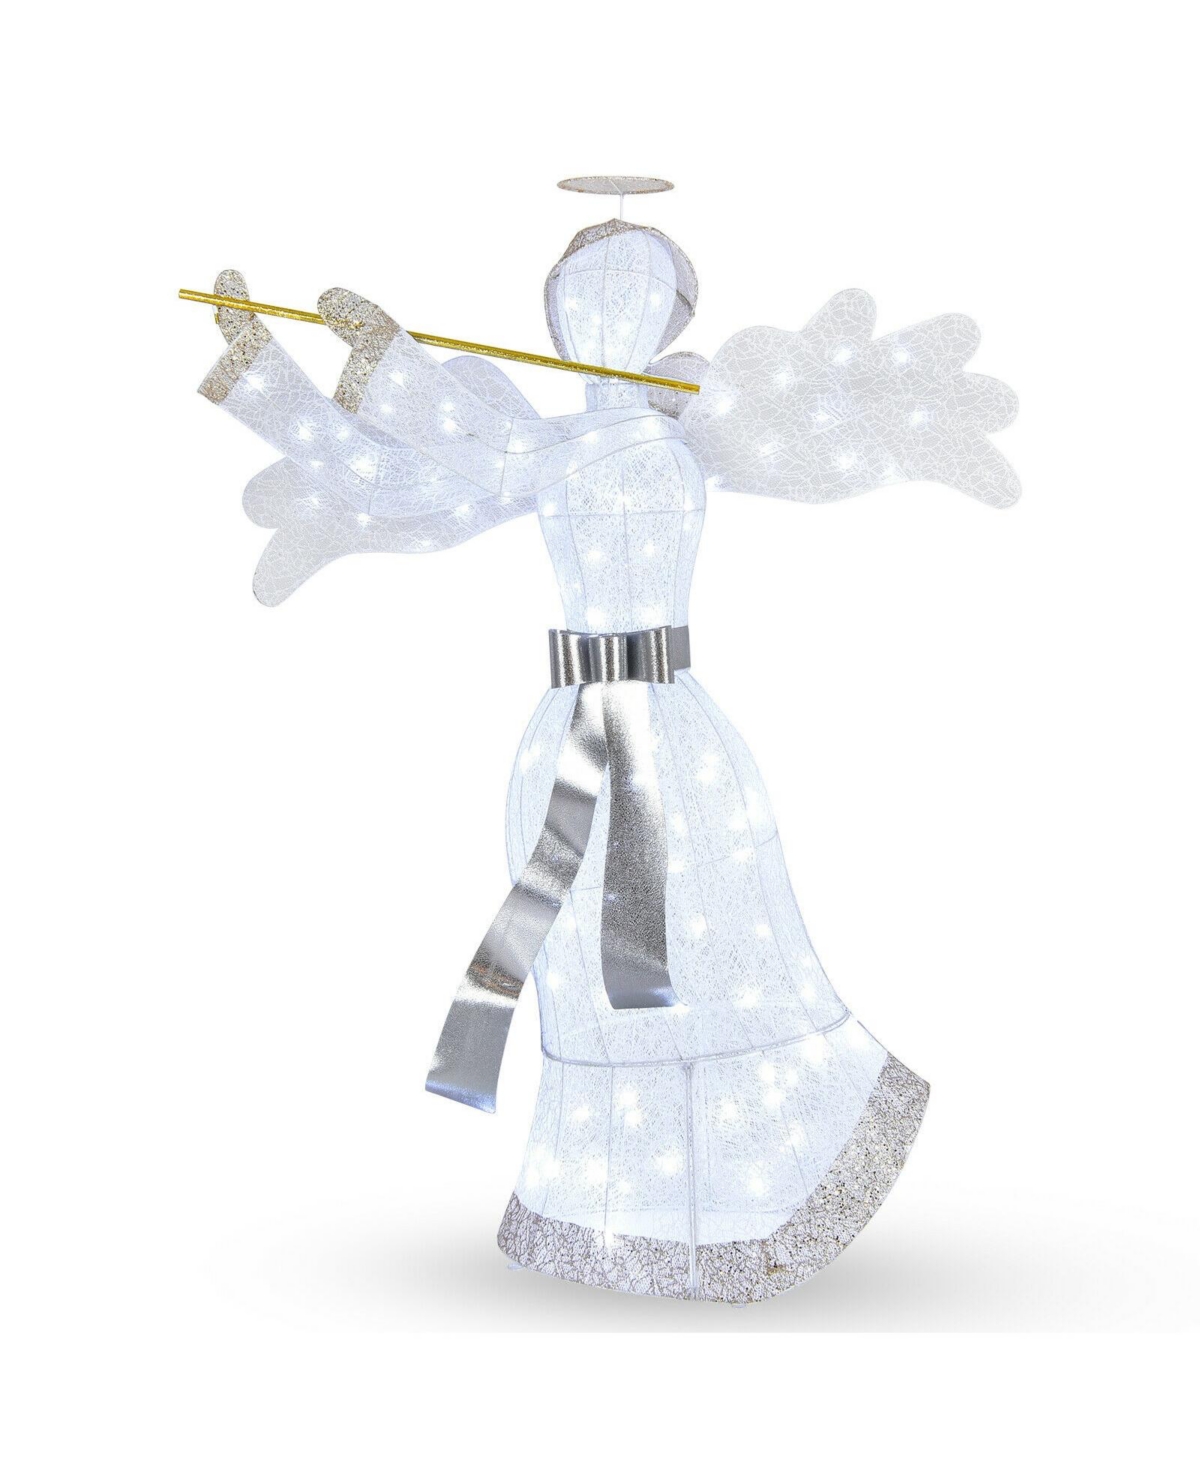 Pre-Lit Angel Christmas Decoration with 100 Led Lights - White, gold